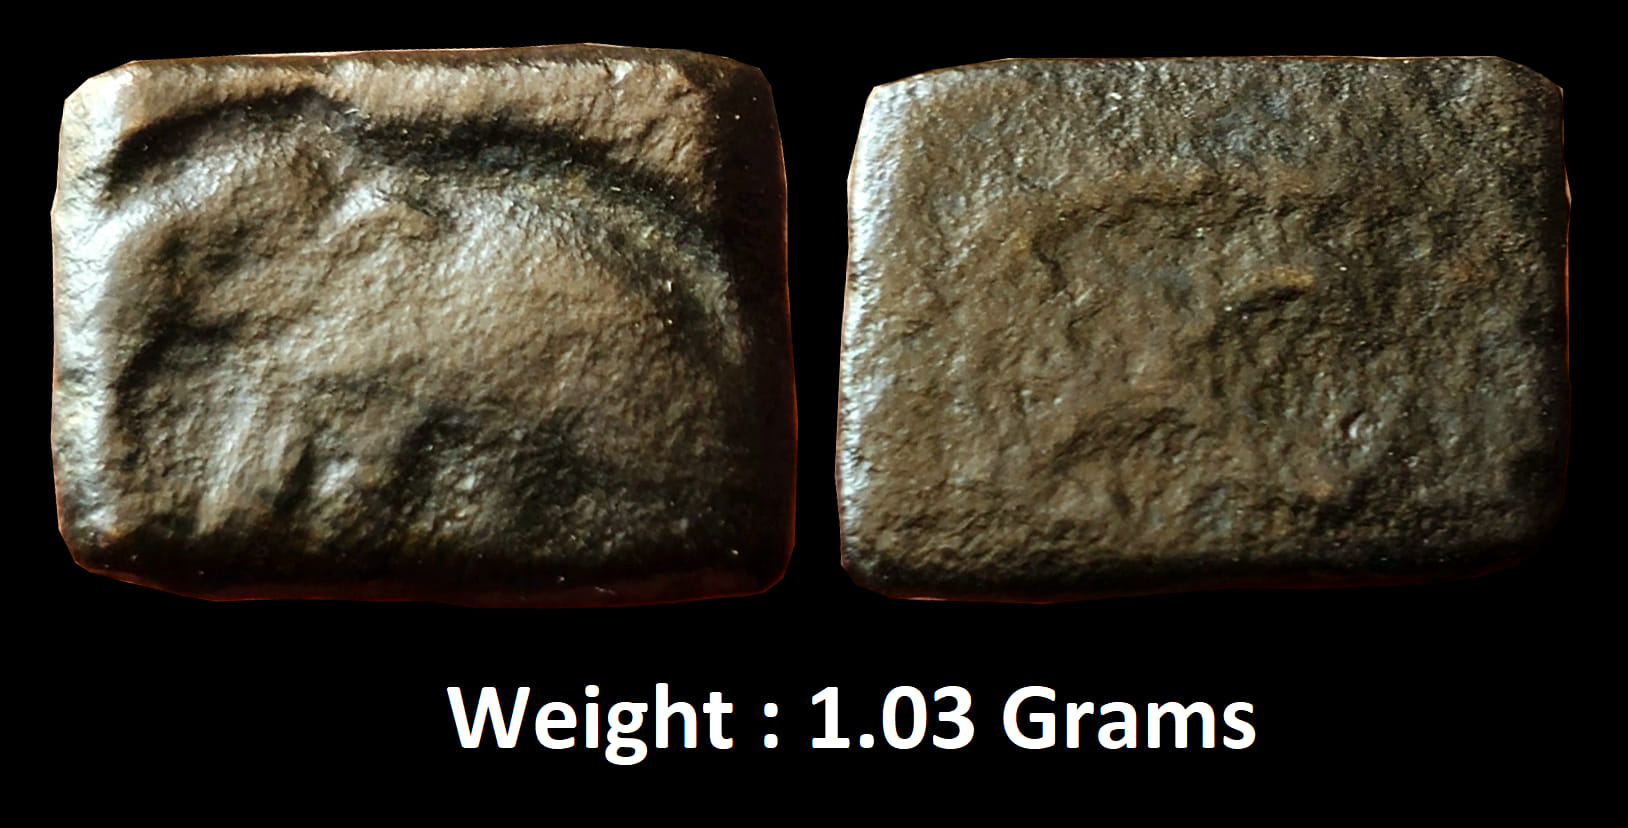 Ancient ; Central India Coinage ; Copper Unit
Elephant with trunk downwards and walking towards left with traces of animal motif on reverse ; Weight : 1.03 Grams